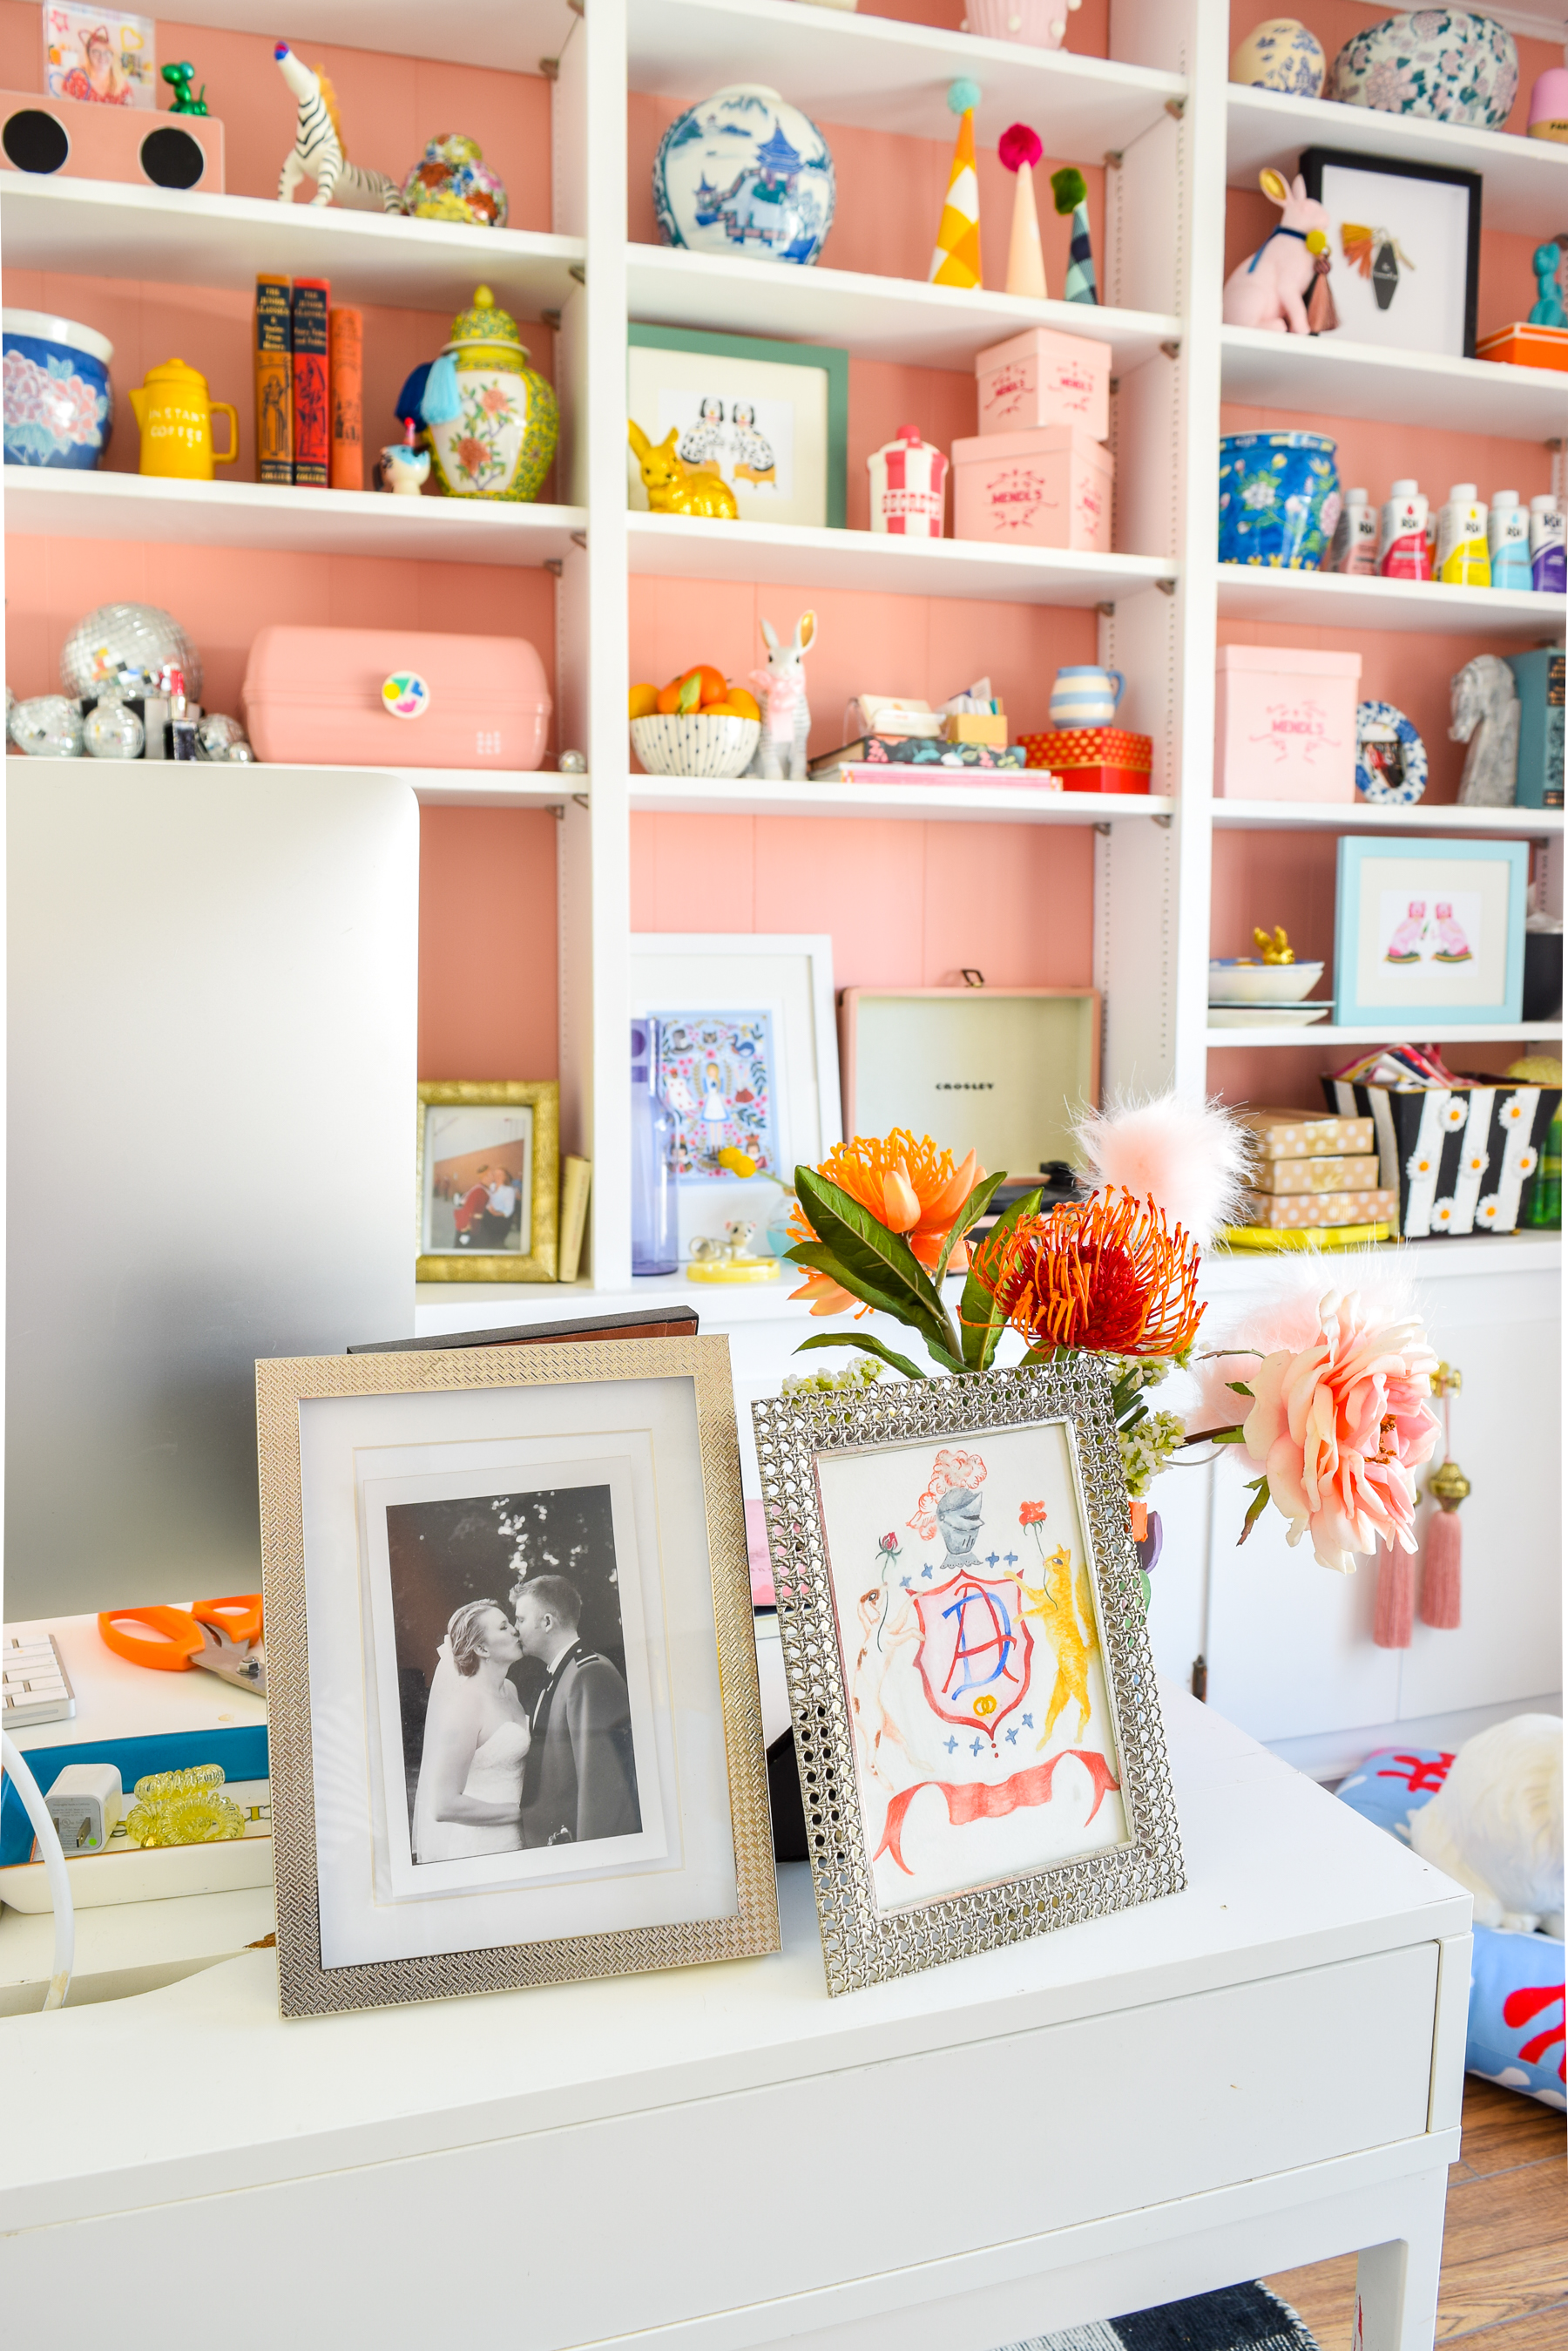 We painted our wood panelling in a bright white and Noble Blush (pink) from BEHR paint, to create a feminine and colourful home office space. 